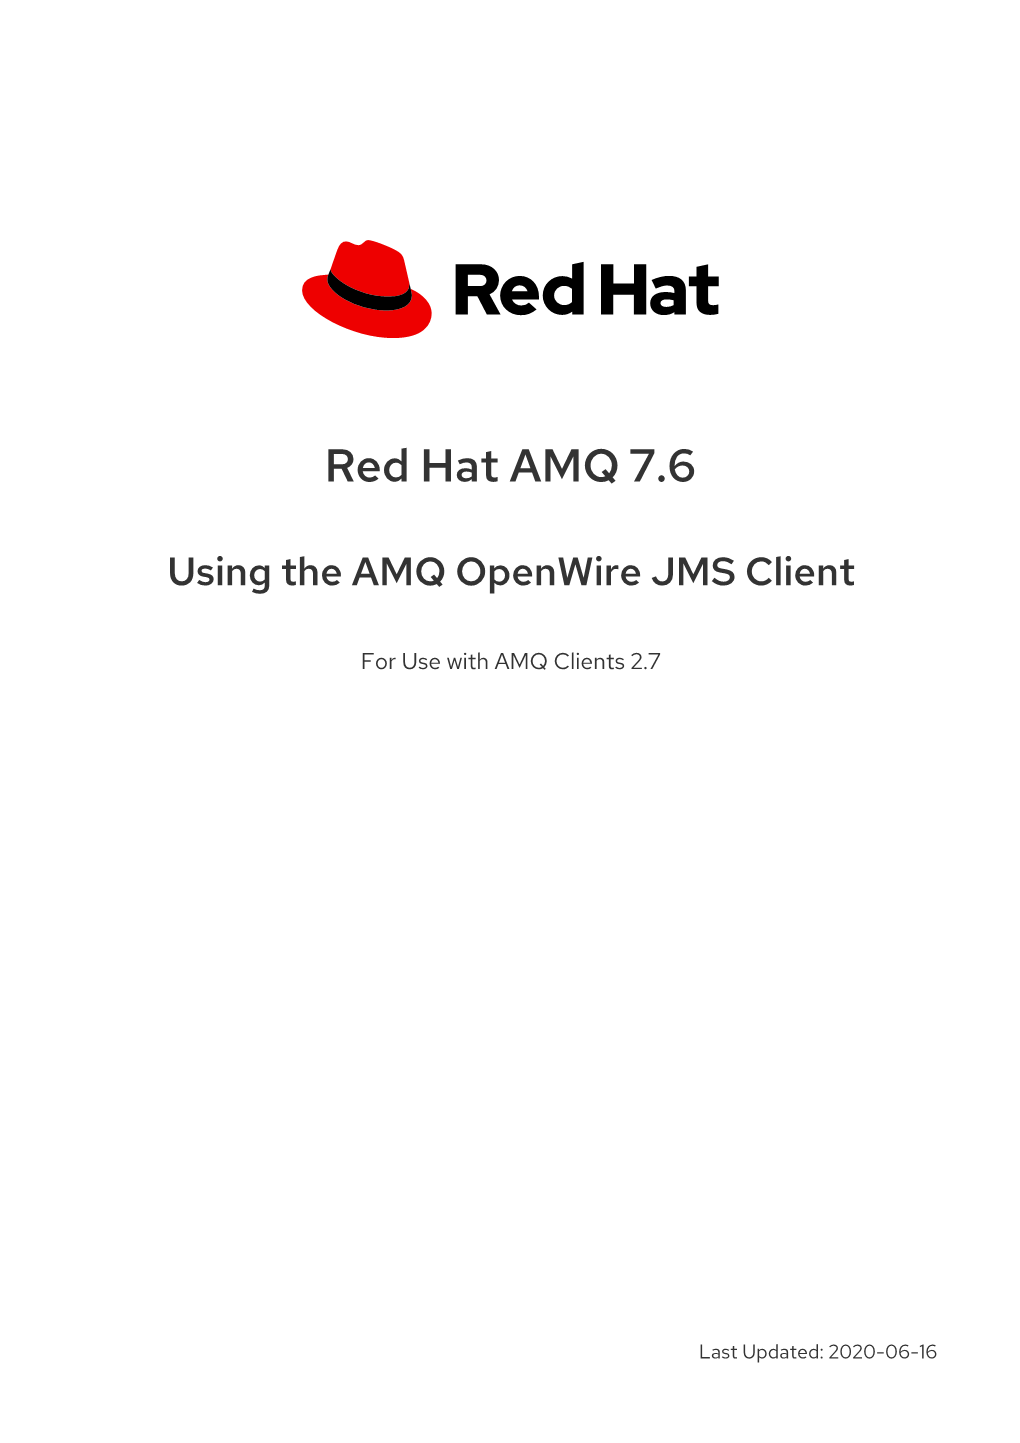 Red Hat AMQ 7.6 Using the AMQ Openwire JMS Client